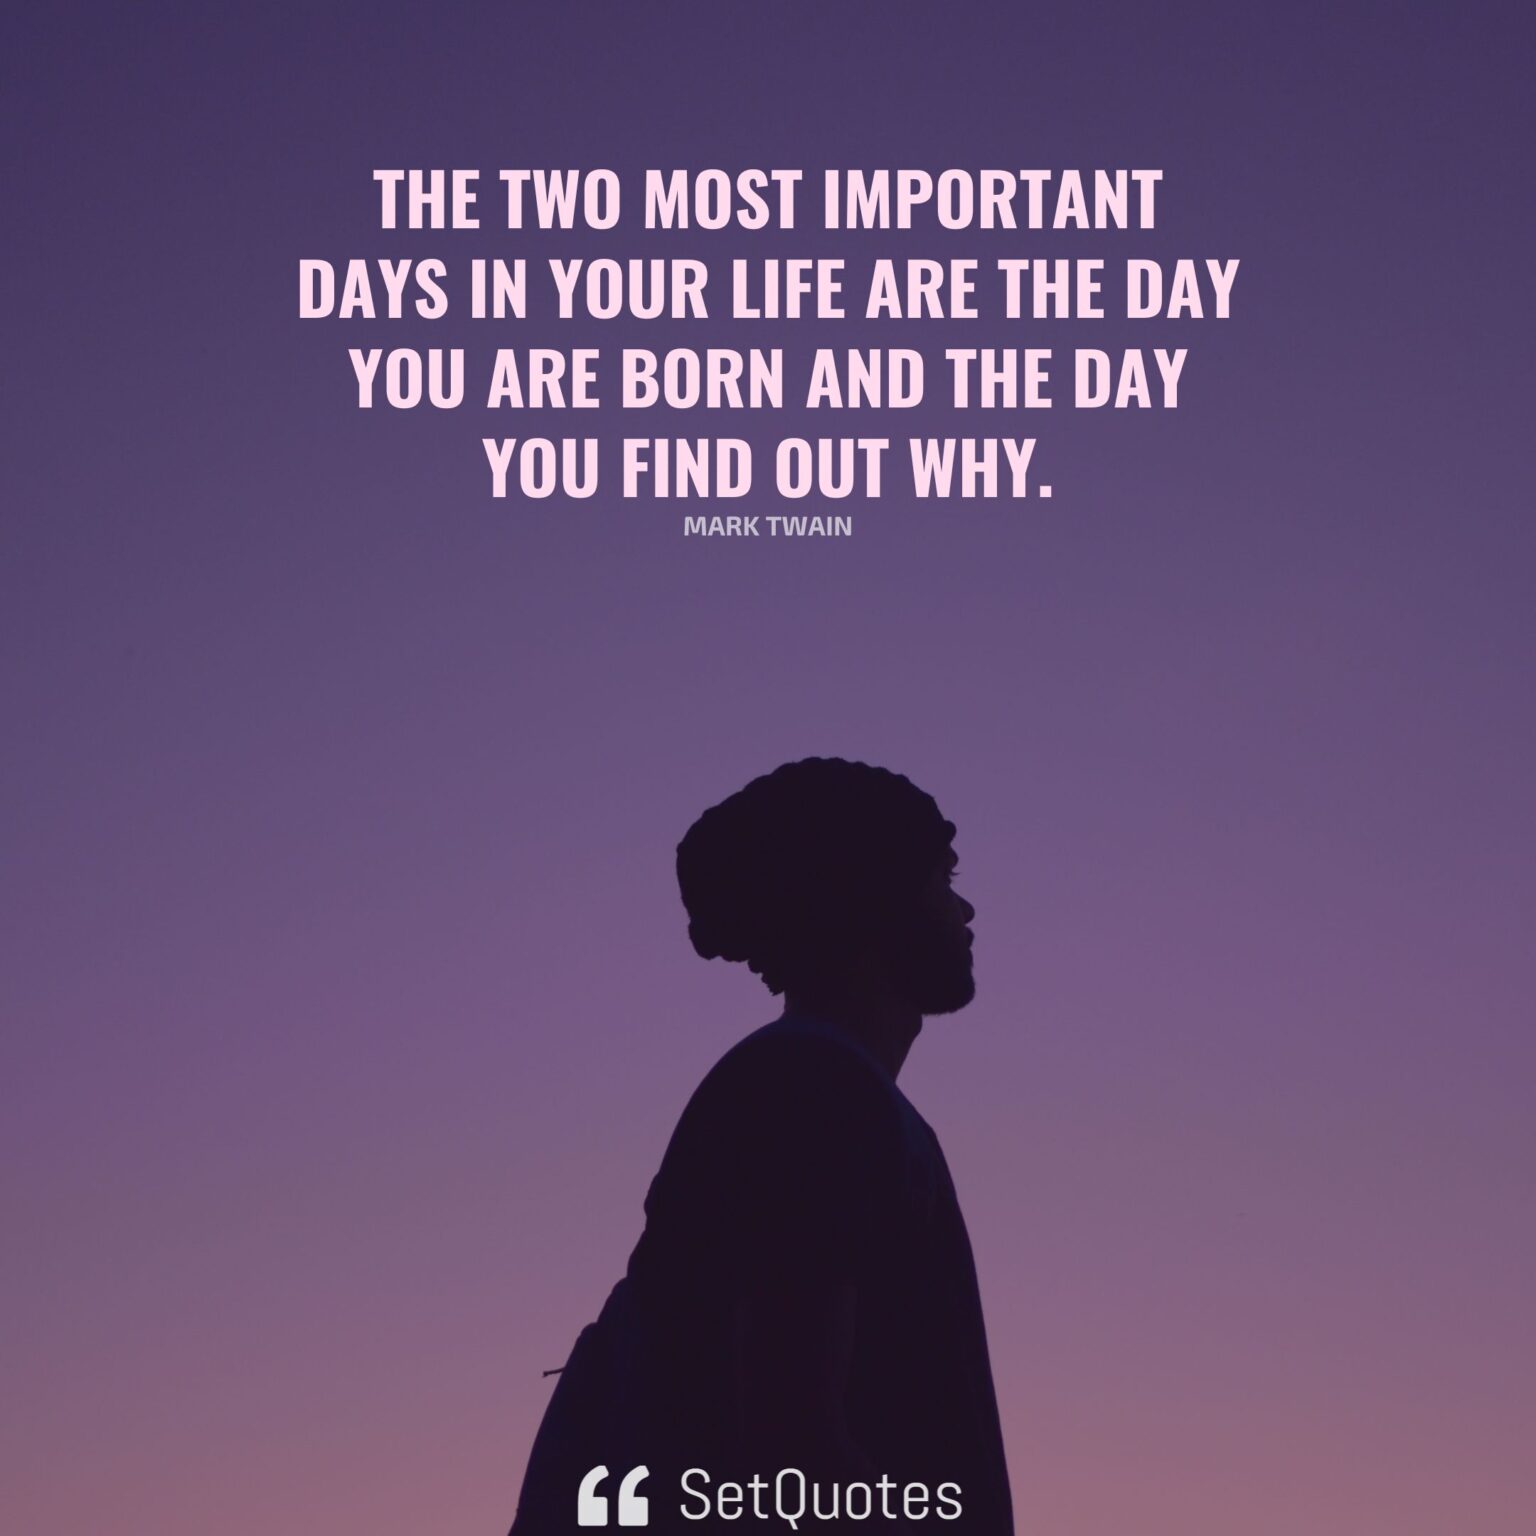 The two most important days in your life are the day you are born and